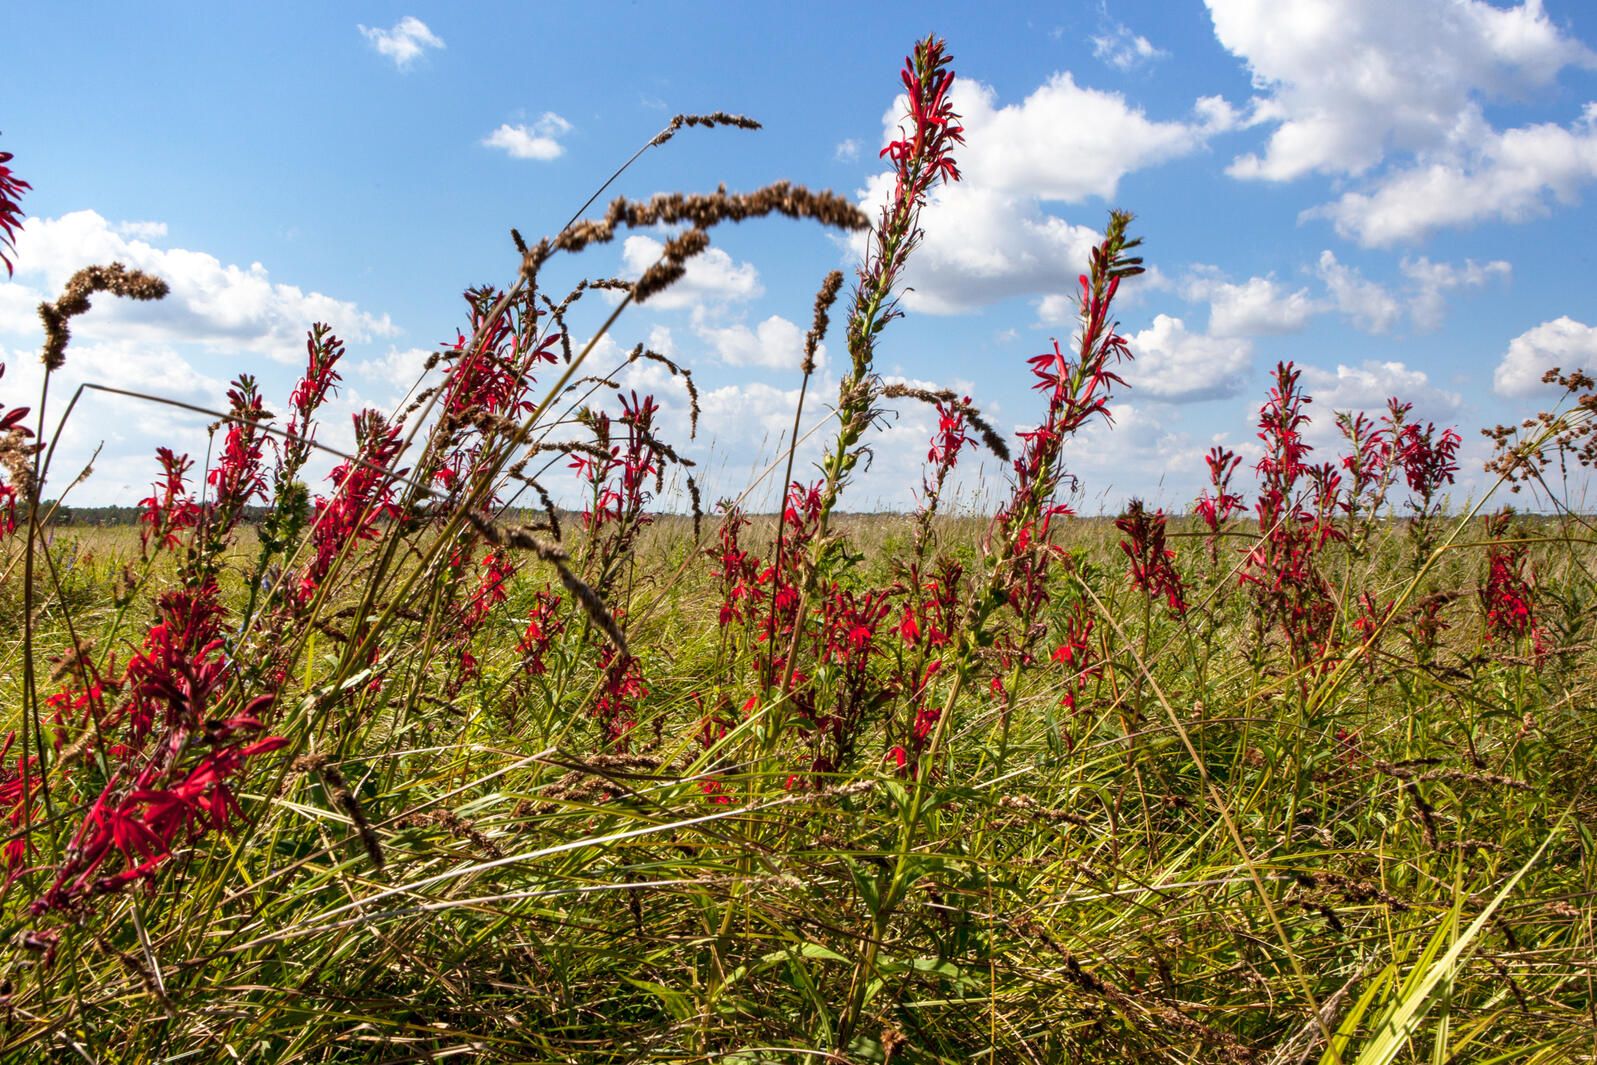 Cardinal Flowers are very yummy for hummingbirds, Bartel Grassland, Cook County, Illinois. Photo: Camilla Cerea